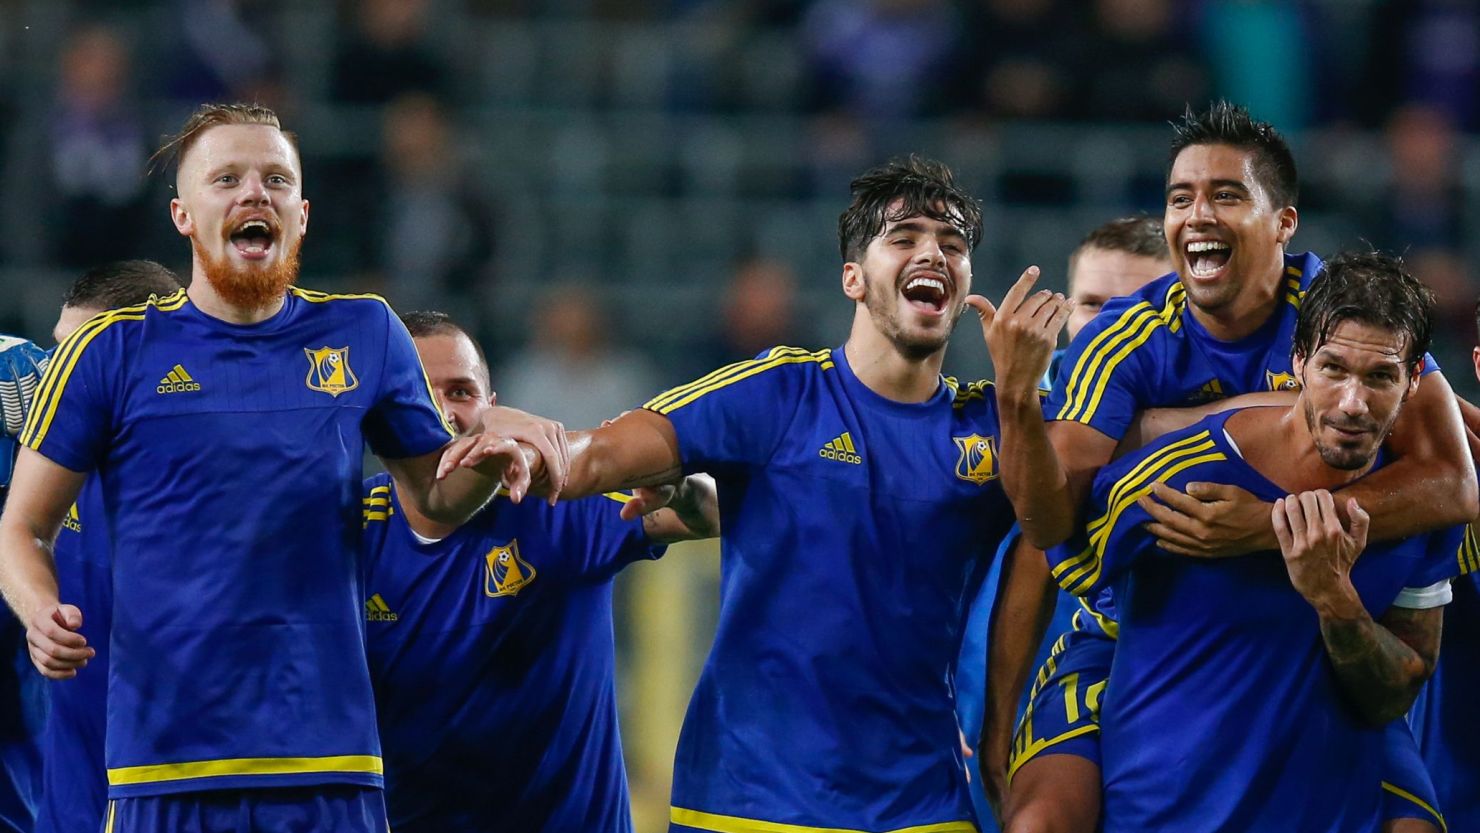 Russia's FC Rostov will compete in the European Champions League for the first time.